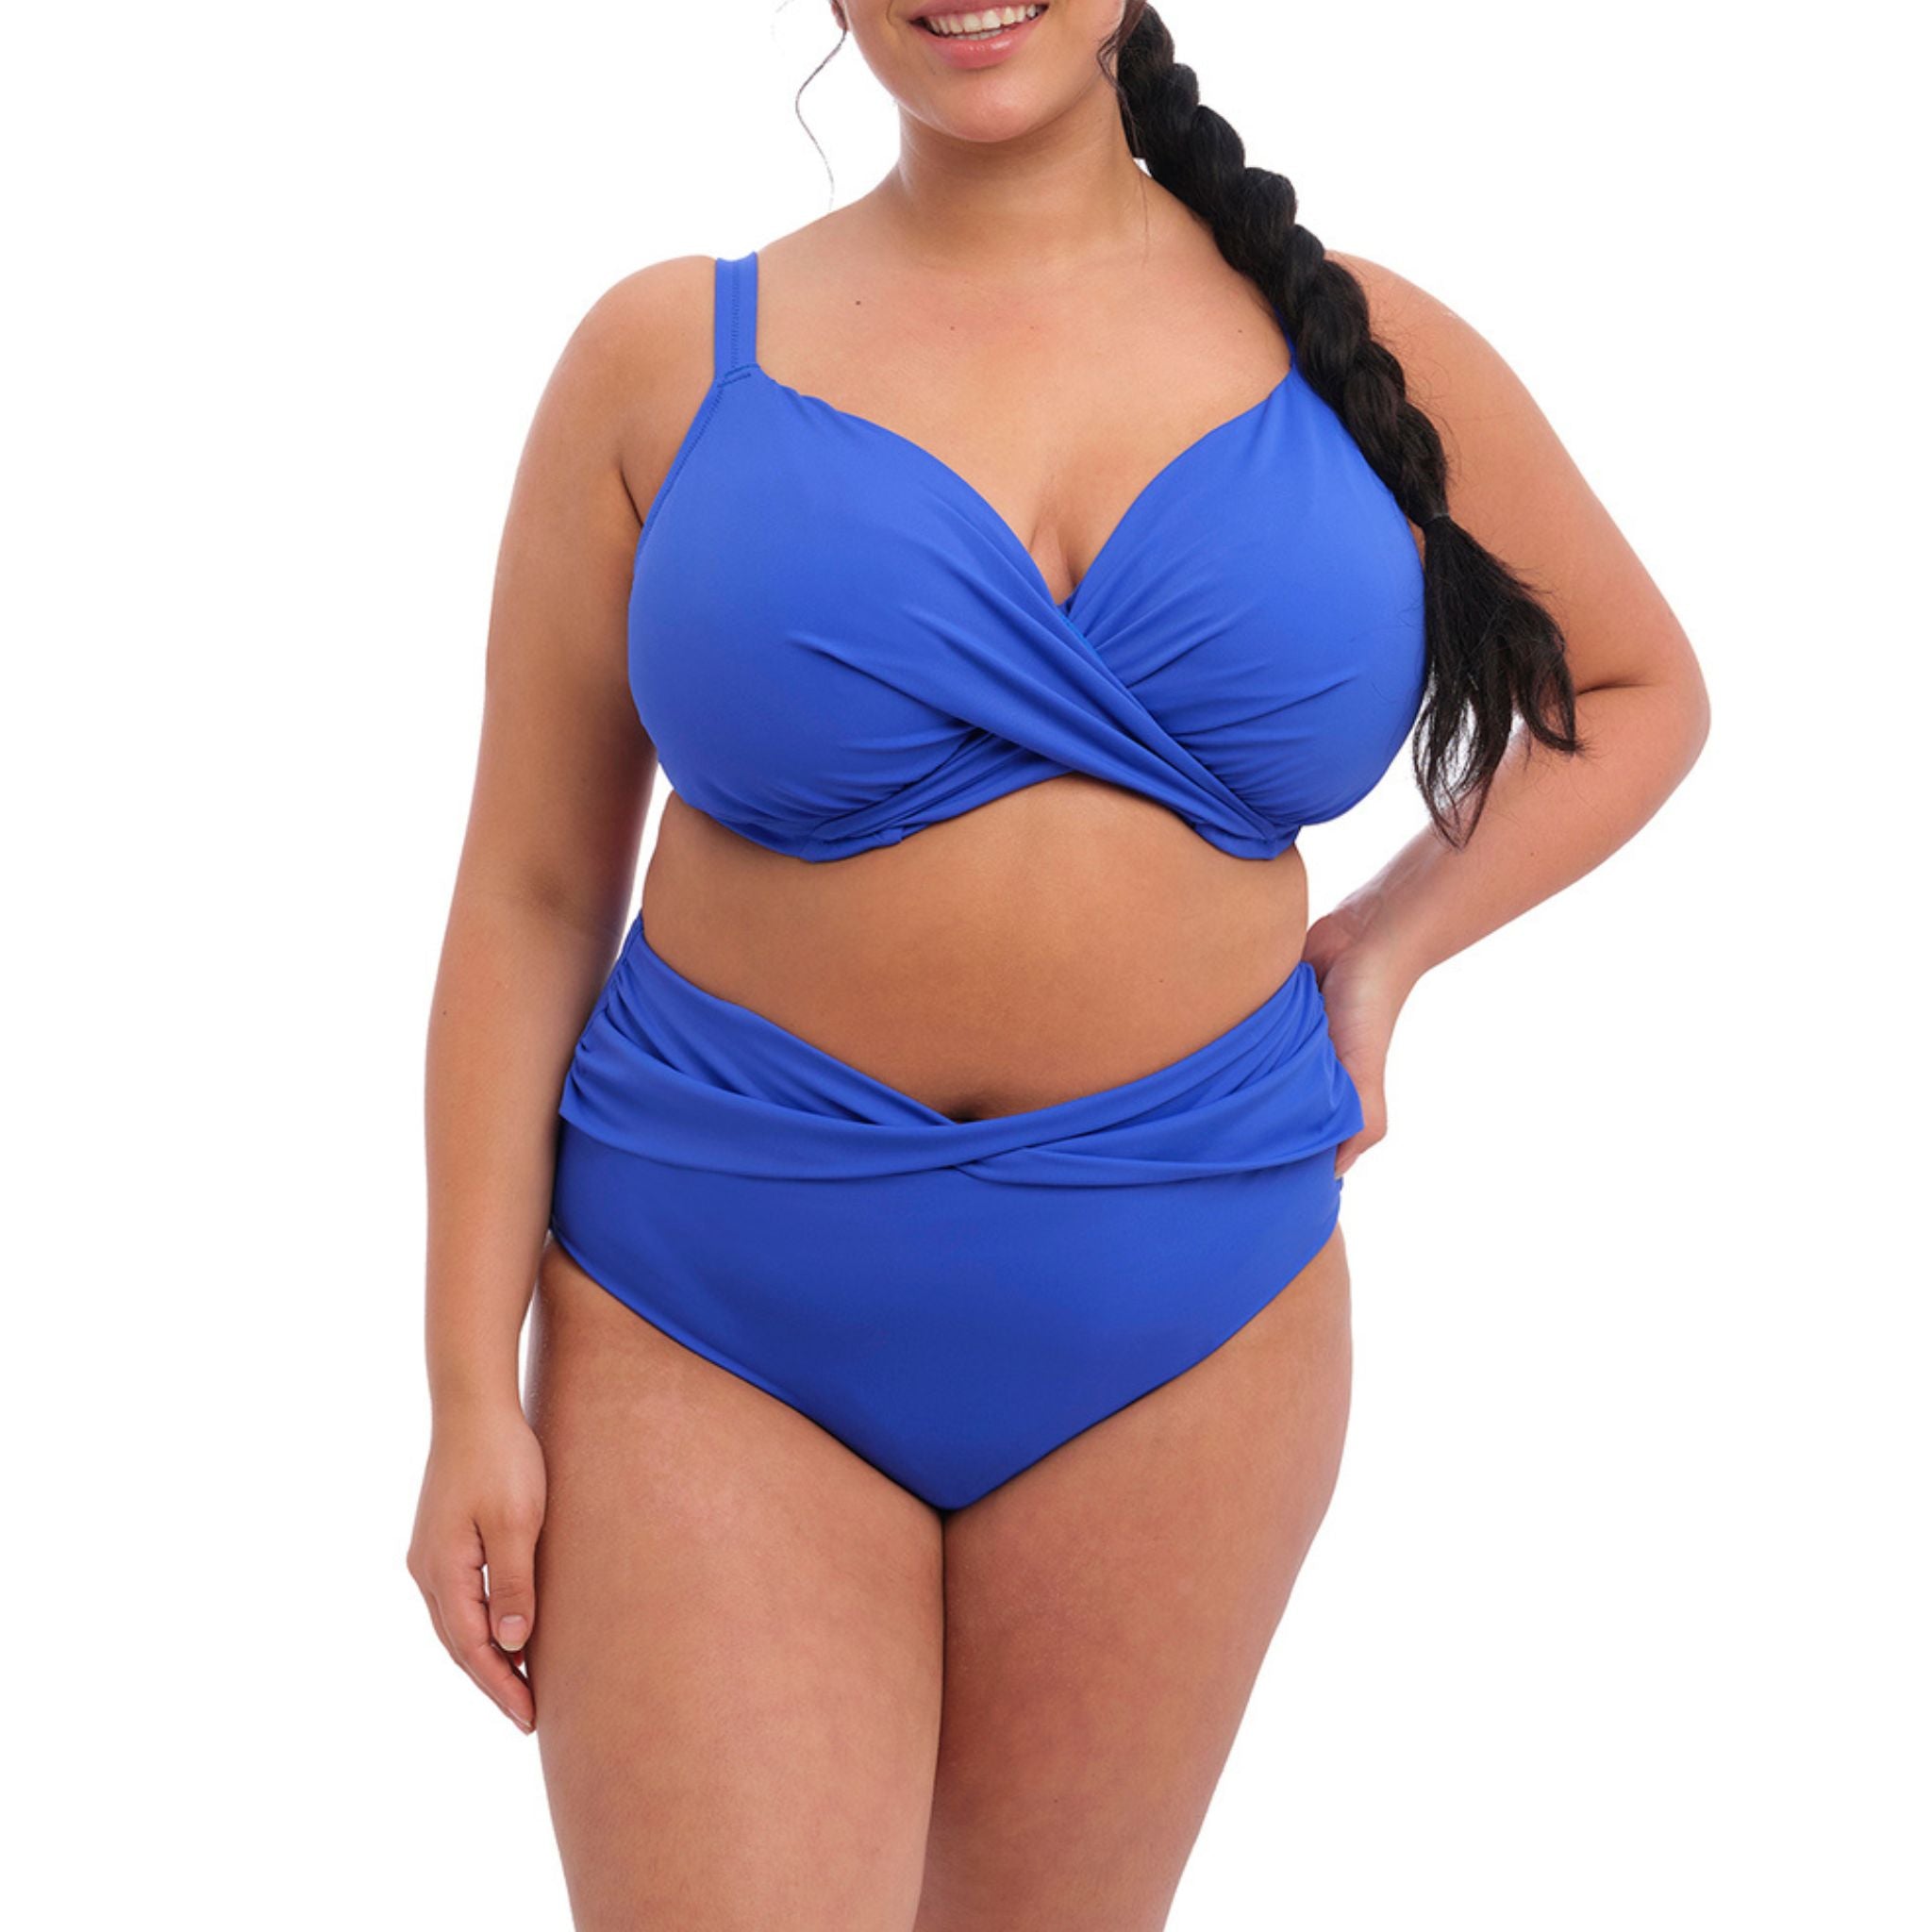 Crafted for the perfect poolside style, uncover the chic Magnetic Wrap Plunge Bikini Top. The must-have look features a flattering gathered wrap overlay on fully lined cups for undeniable comfort and support.  Flattering gathered wrap overlay at the front  Concealed elastic at the neckline for ease of fit  Designed to fit like an Elomi lingerie bra with fully lined cups  Adjustable shoulder straps